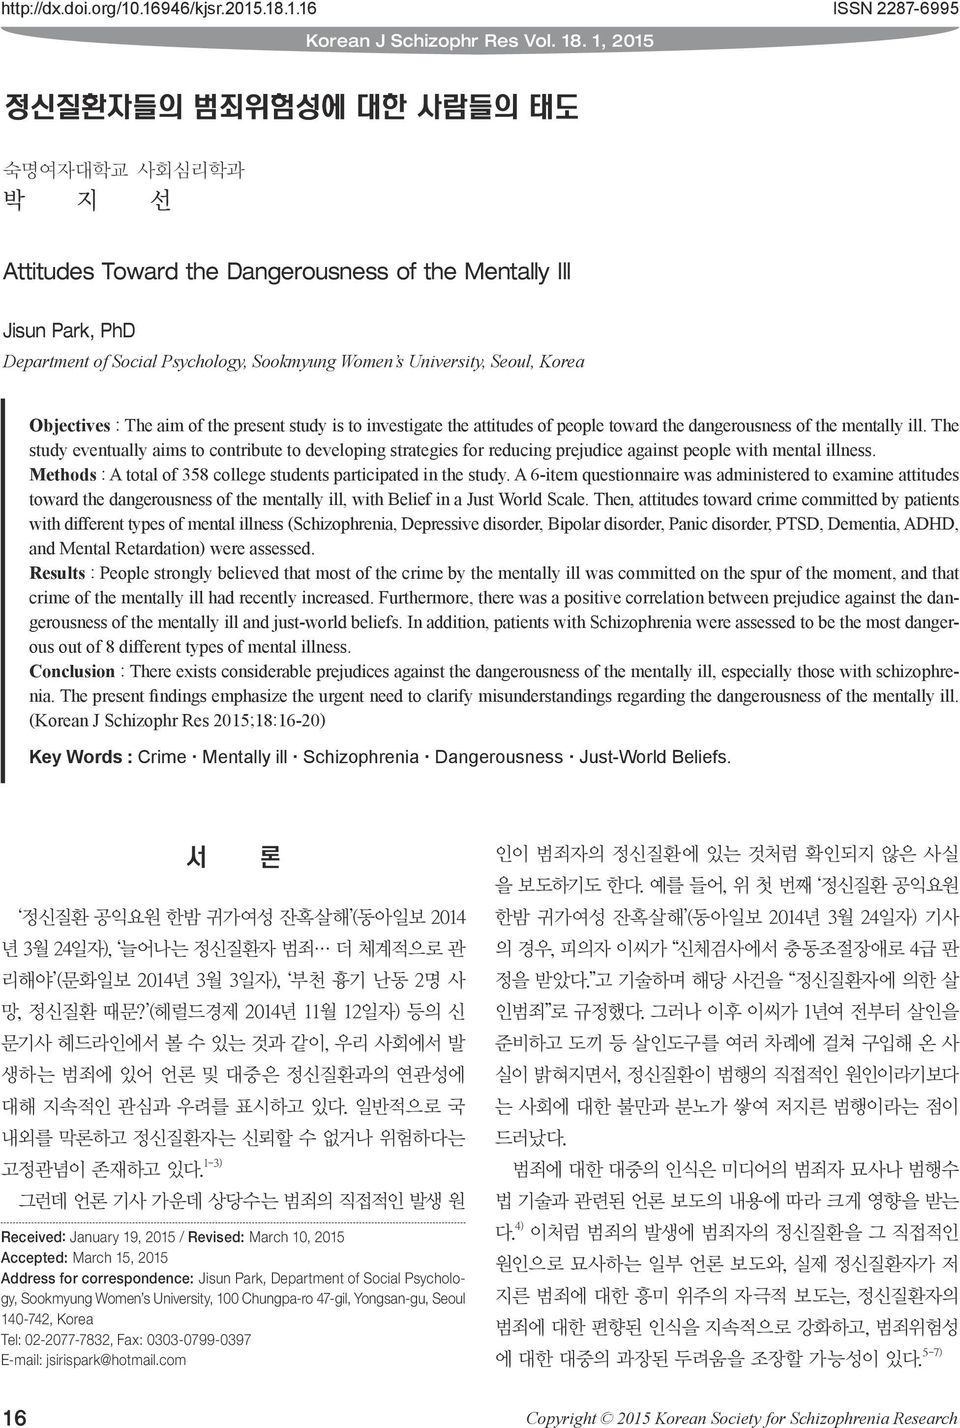 Korea Objectives : The aim of the present study is to investigate the attitudes of people toward the dangerousness of the mentally ill.